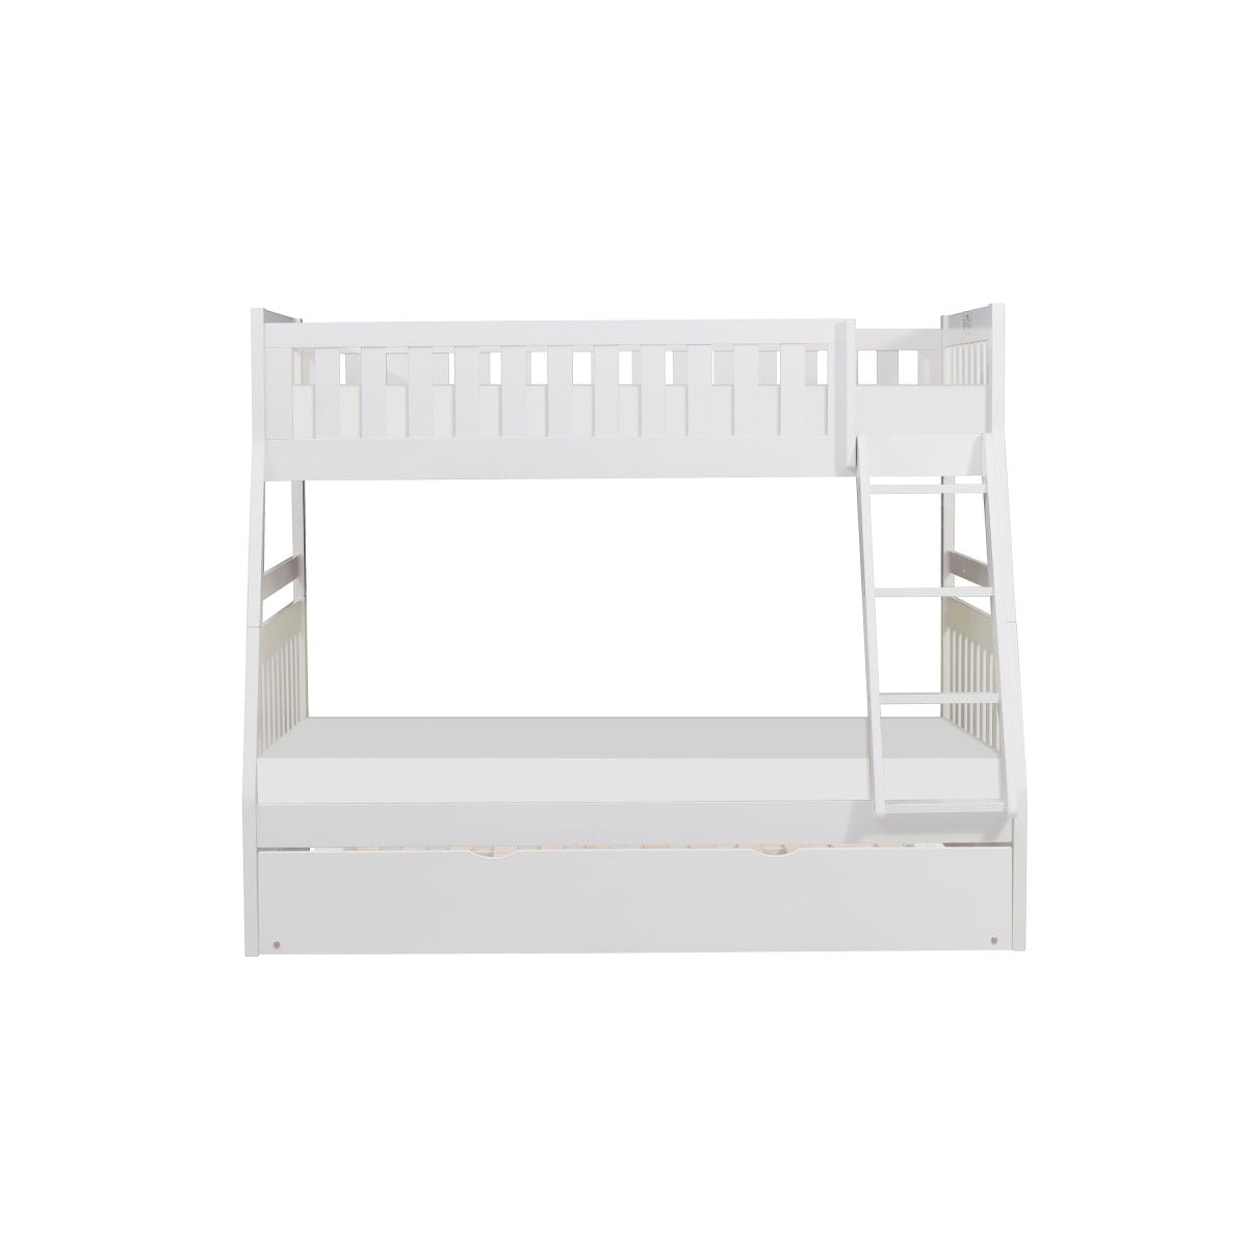 Homelegance Galen Twin over Full Bunk Bed